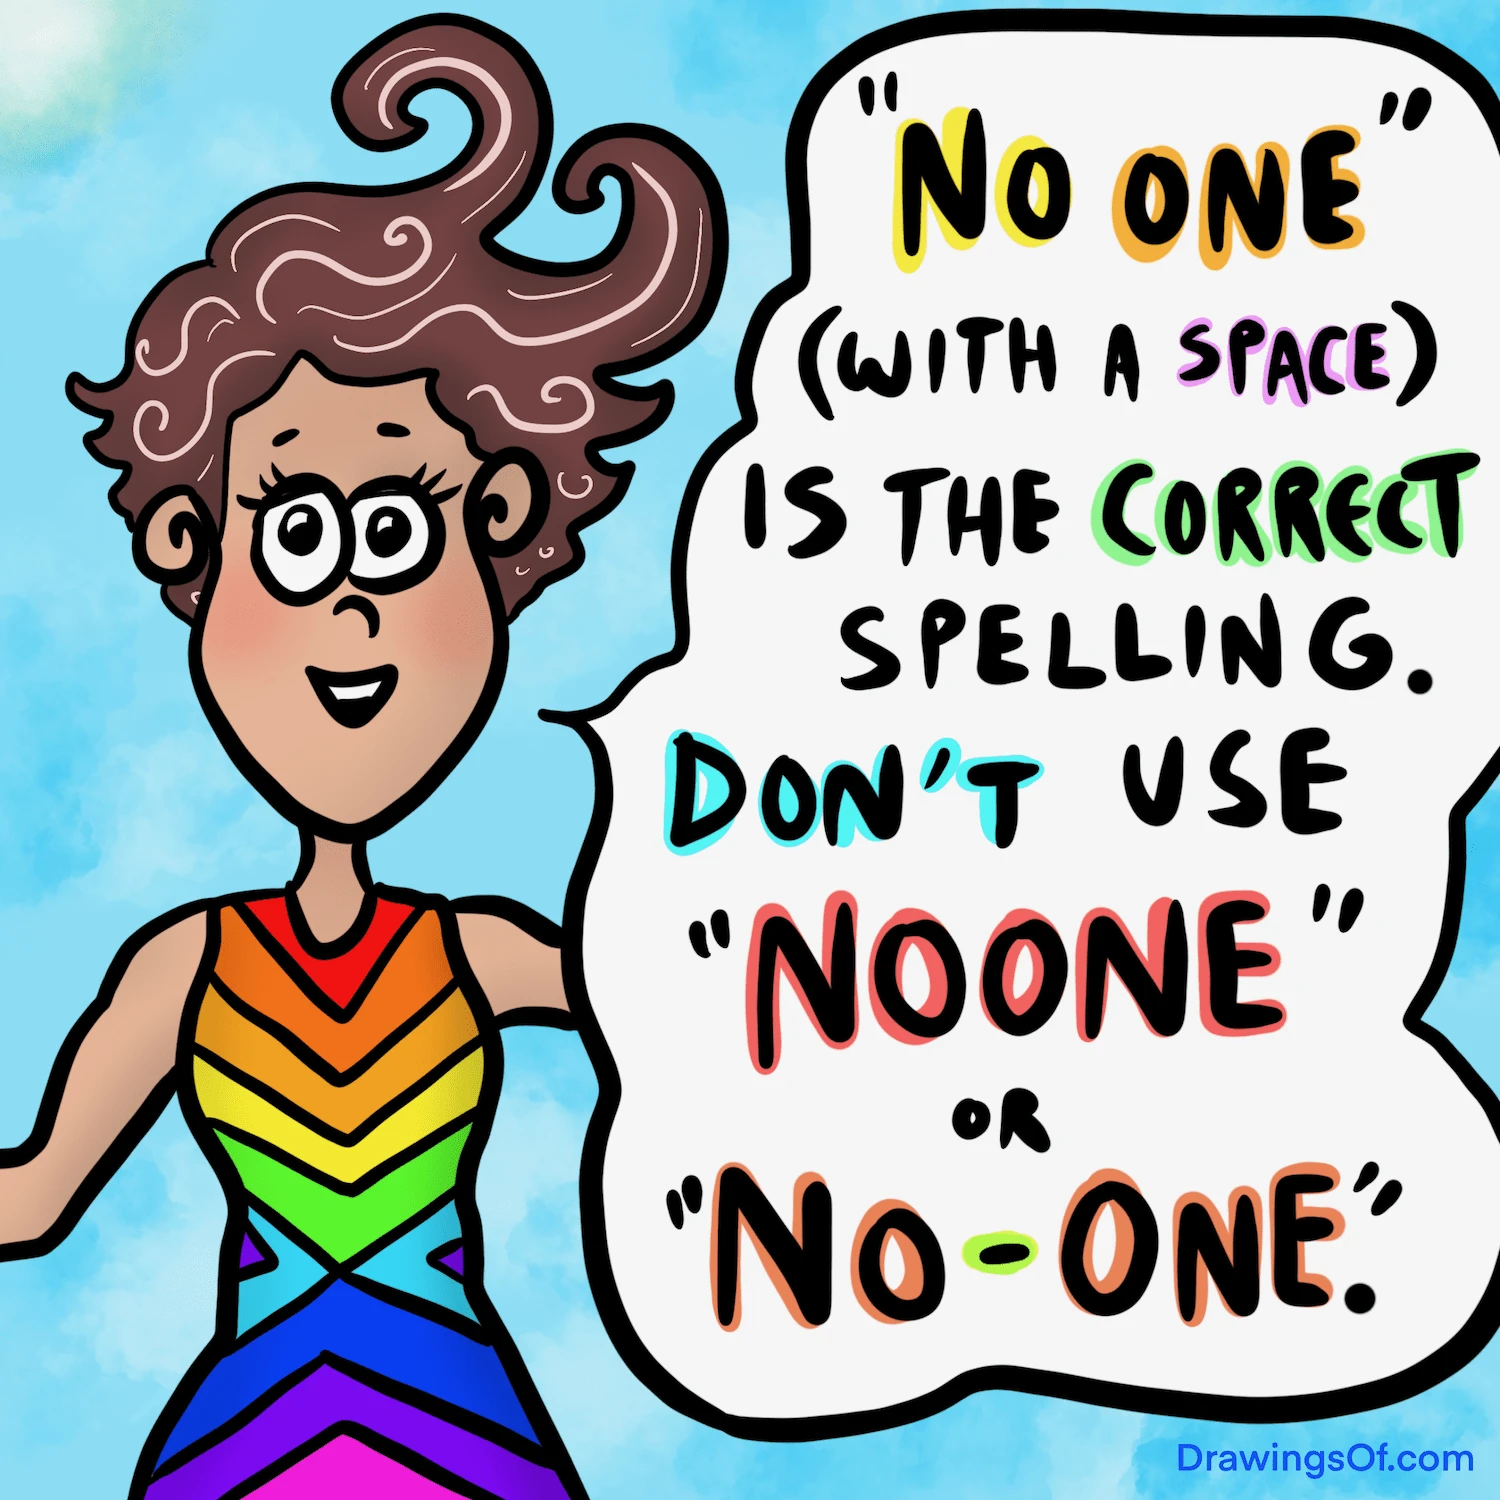 No one vs. noone or no-one